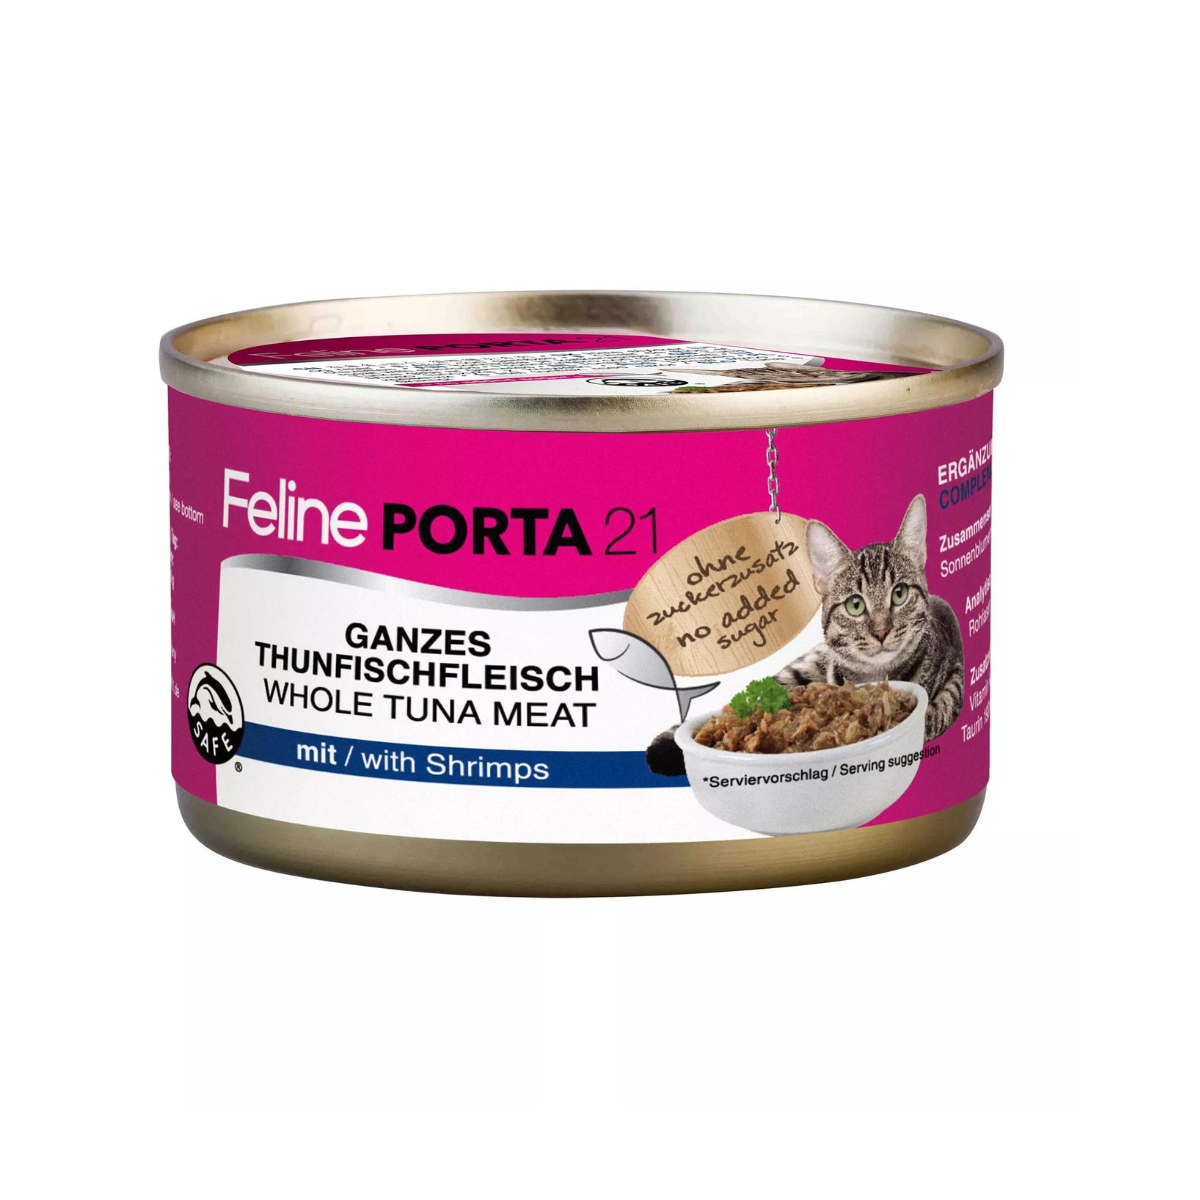 Canned tuna and shrimp for cats and kittens